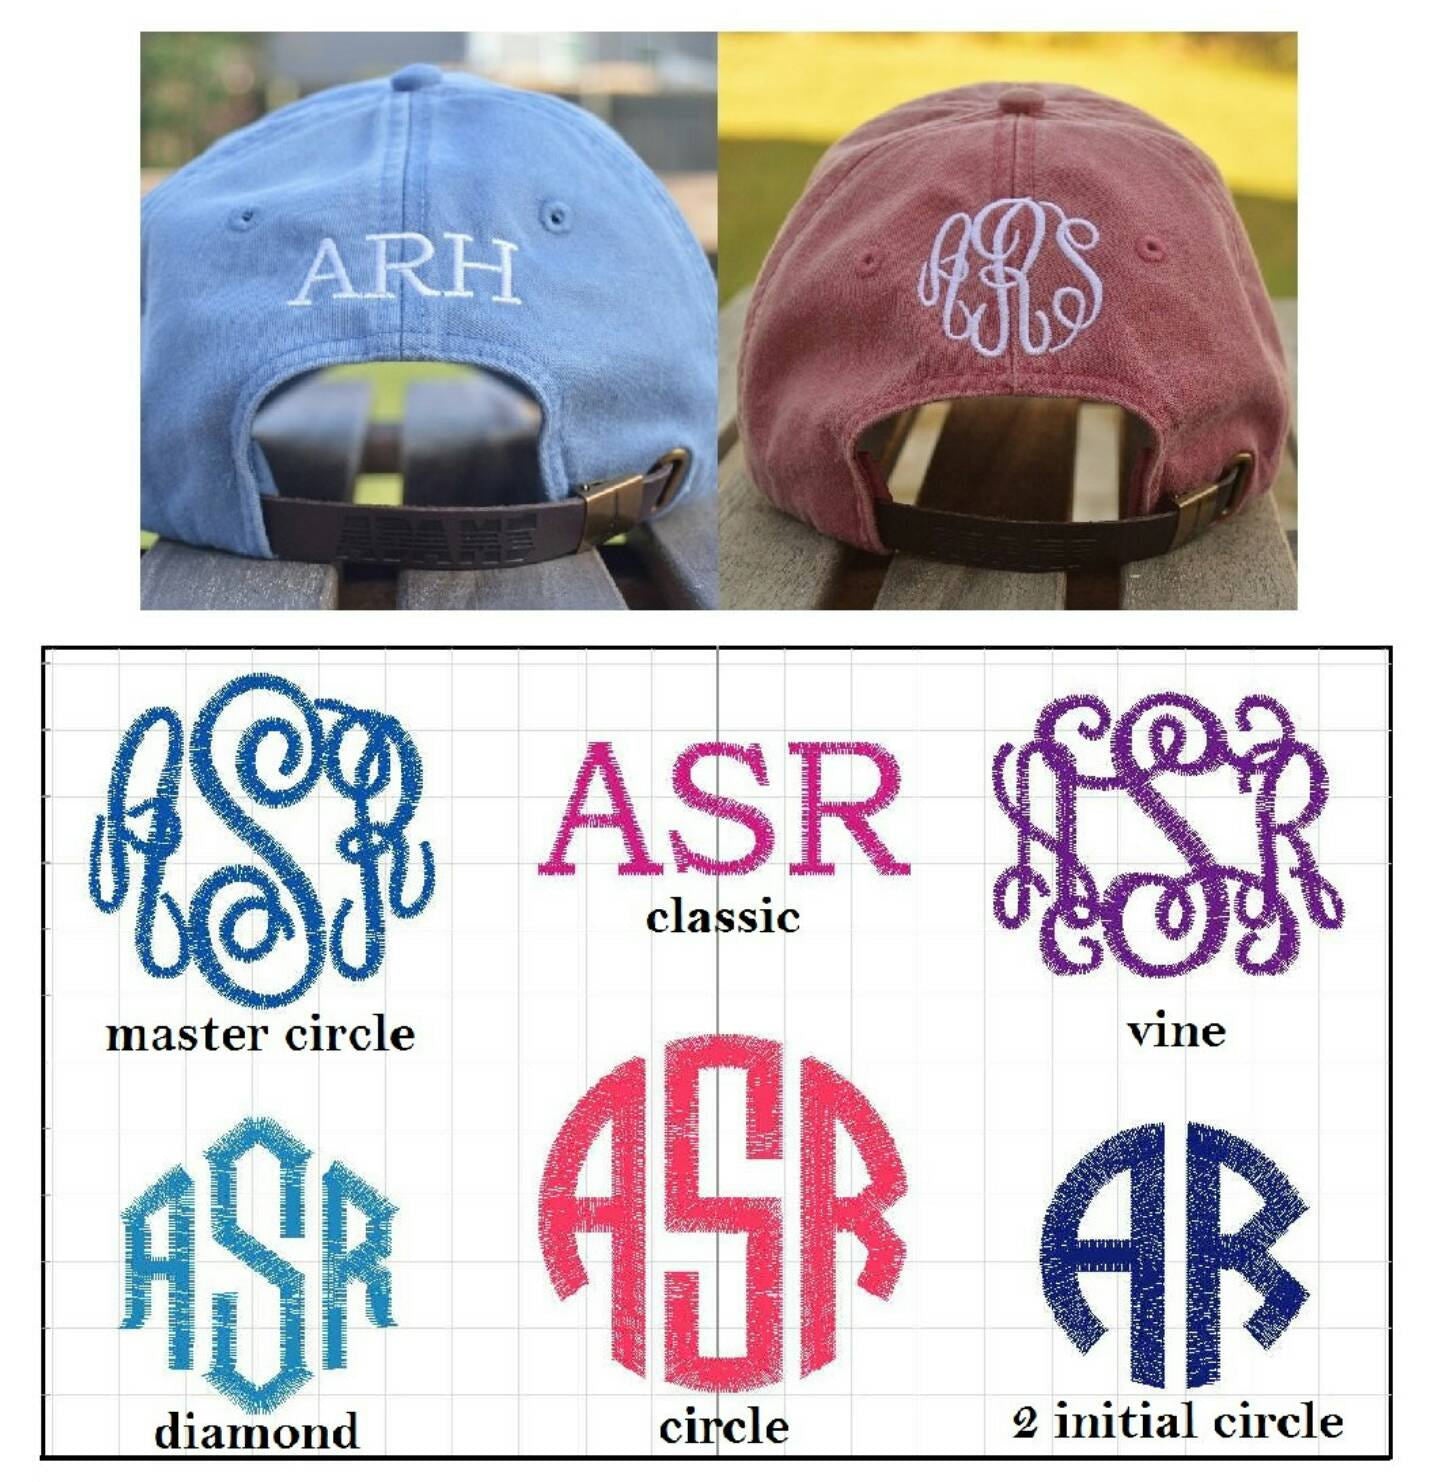 Free Shipping - Embroidery Personalized Newborn/Infant/Toddler/Youth Number Baseball Hat-  First Birthday Hat - Embroidered Letter Ball Cap